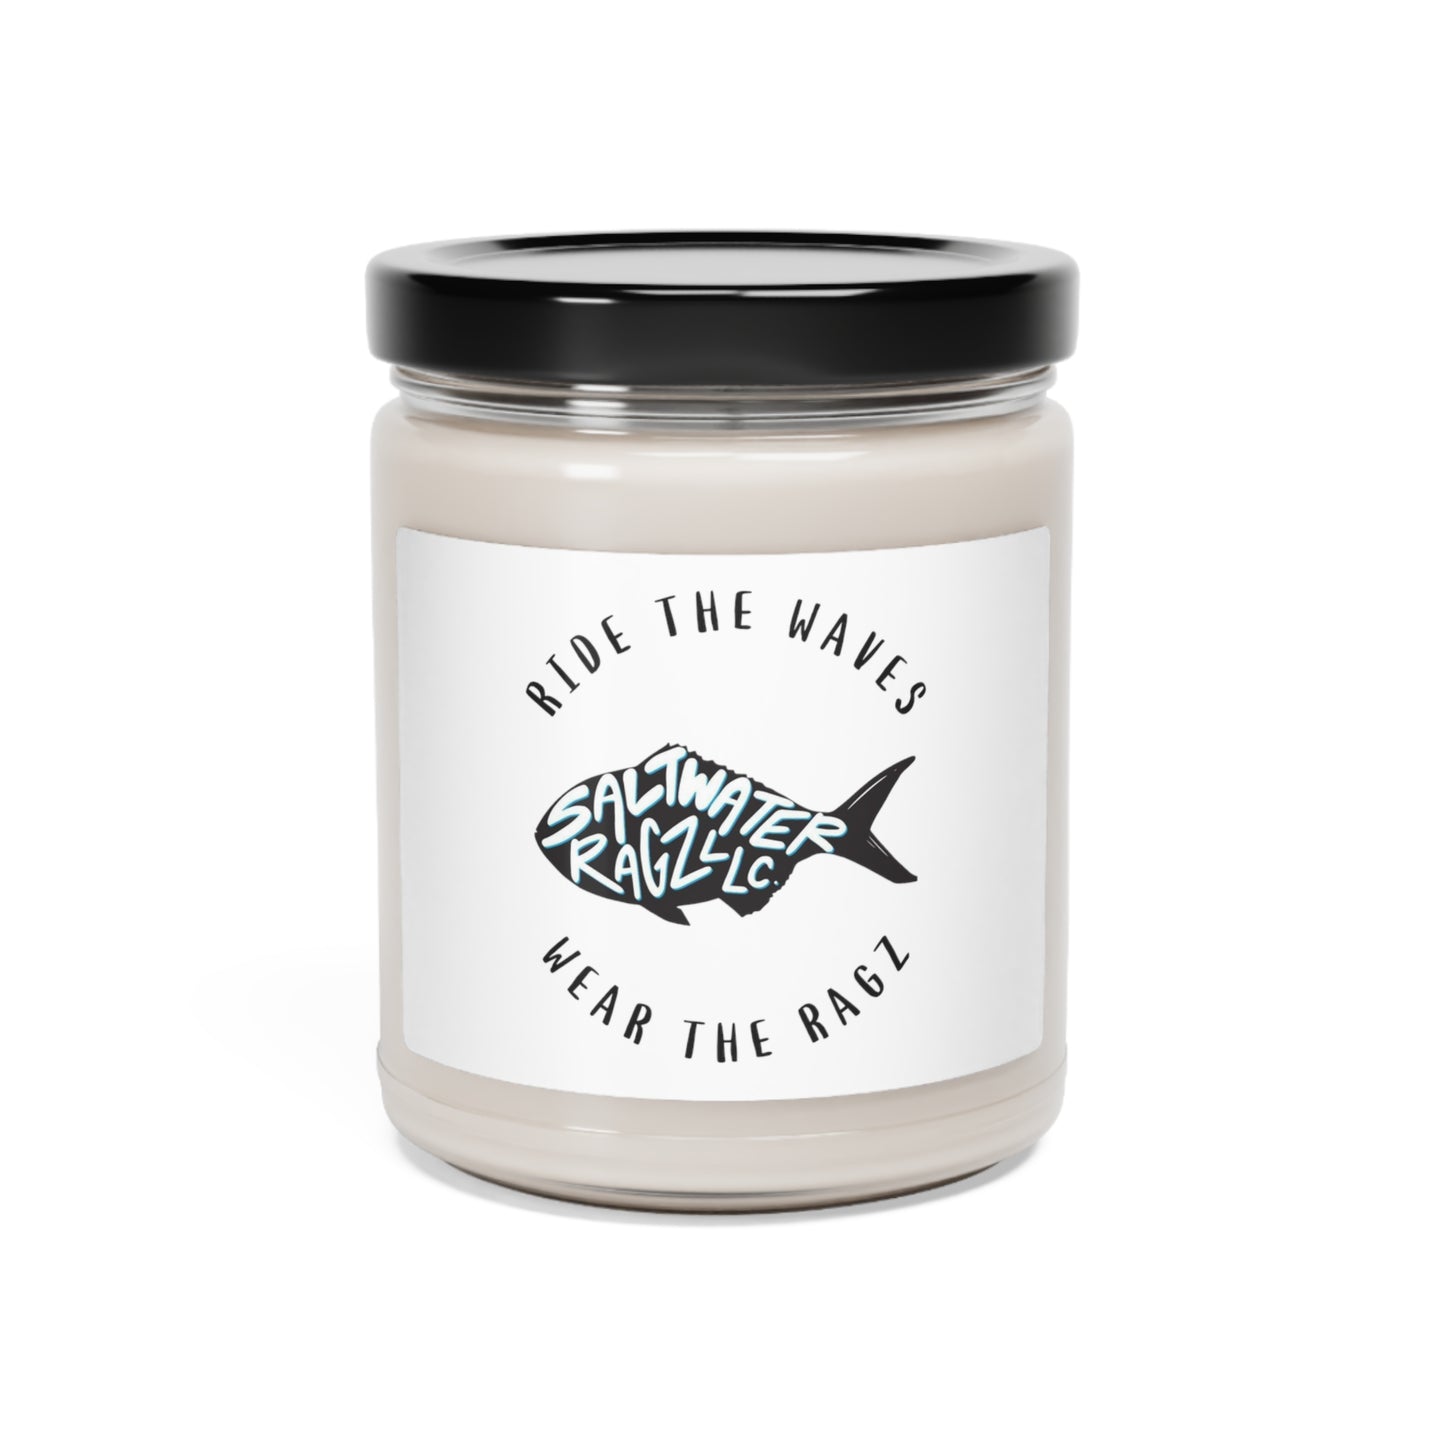 Saltwater Ragz - Scented Soy Candle, 9oz